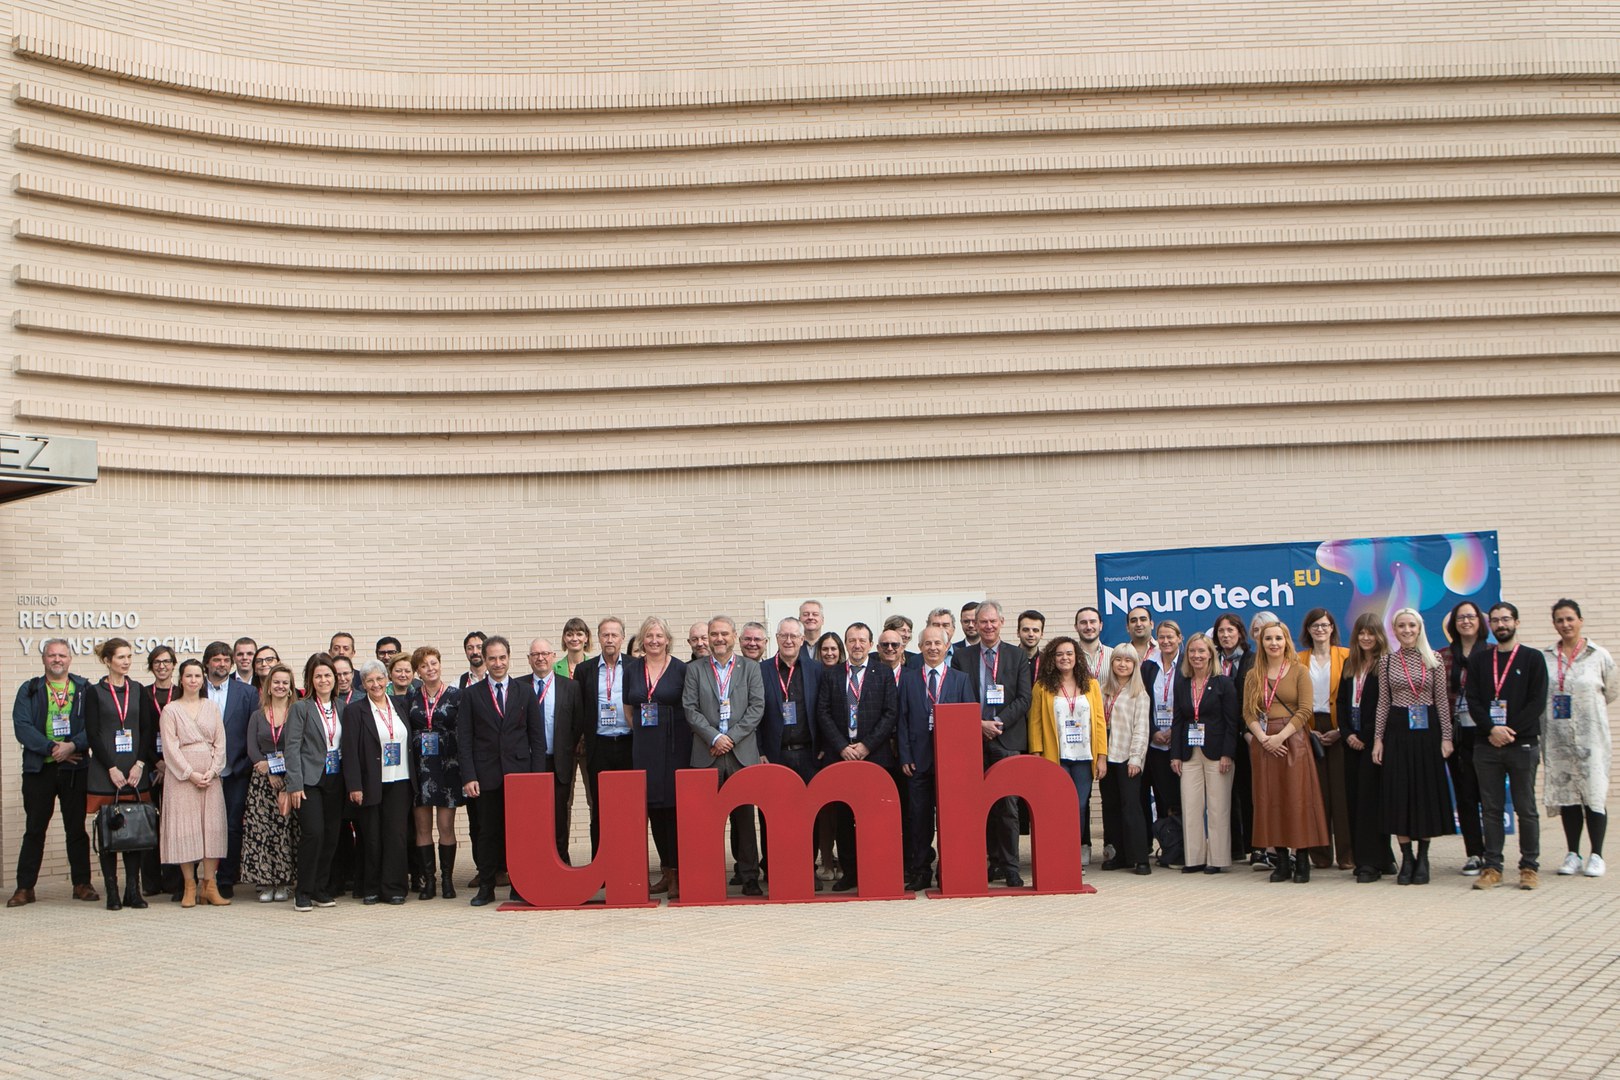 The meeting attendees in Alicante outside a building on campus at Universitas Miguel Hernández.